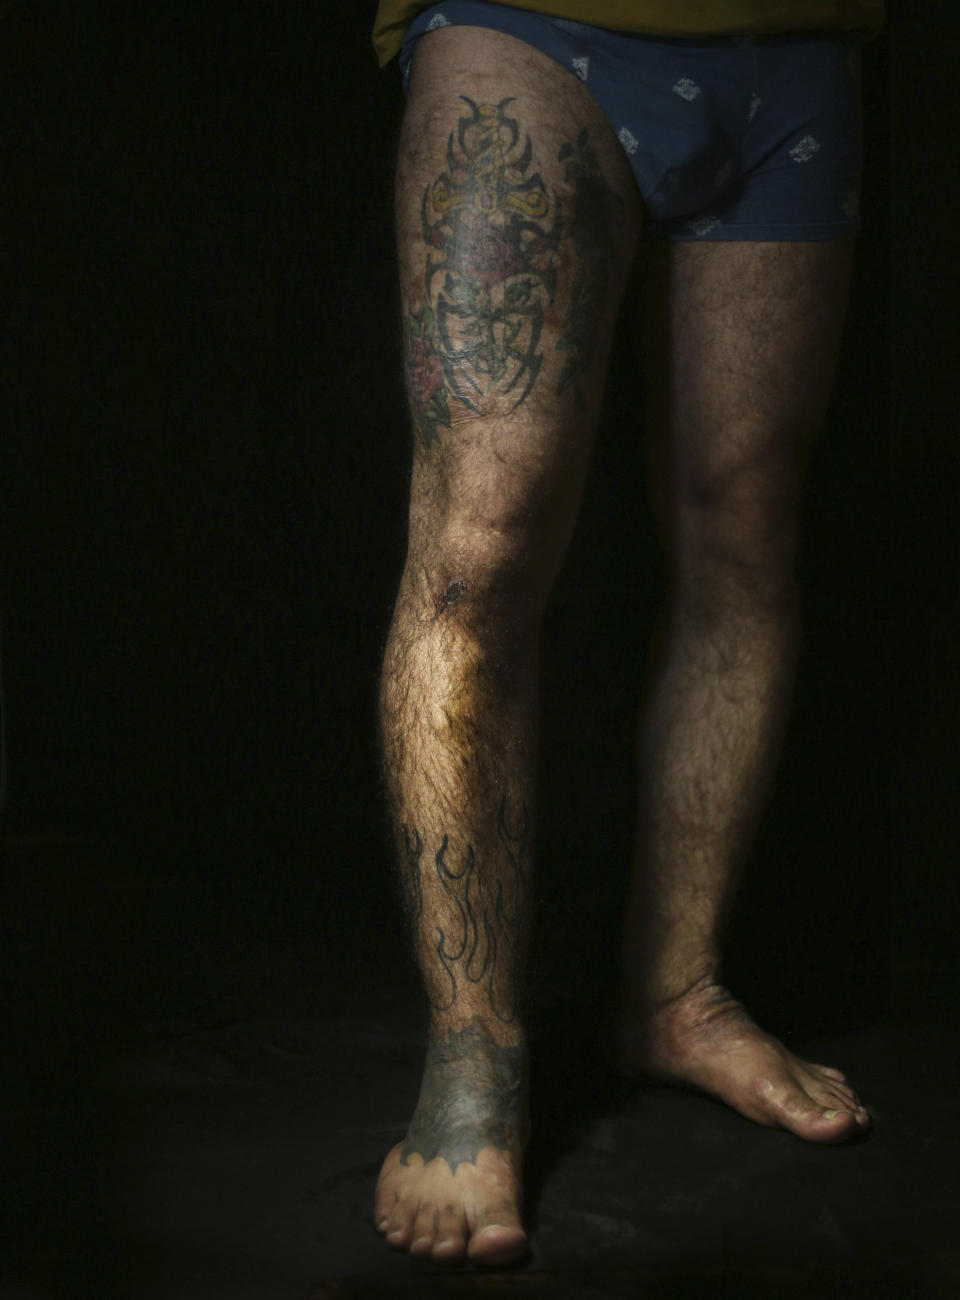 In this Wednesday. Oct. 24, 2018, photo, Iraqi soldier Saad Khudeir displays tattoos on his leg to cover scars of the burns he suffered in a car bombing, in Baghdad, Iraq. “People stared at me and sometime I felt they were scared of me at the swimming pool,” Khudeir, 36, told The Associated Press, recalling how he decided to cover up his scars to for a better appearance. (AP Photo/Hadi Mizban)